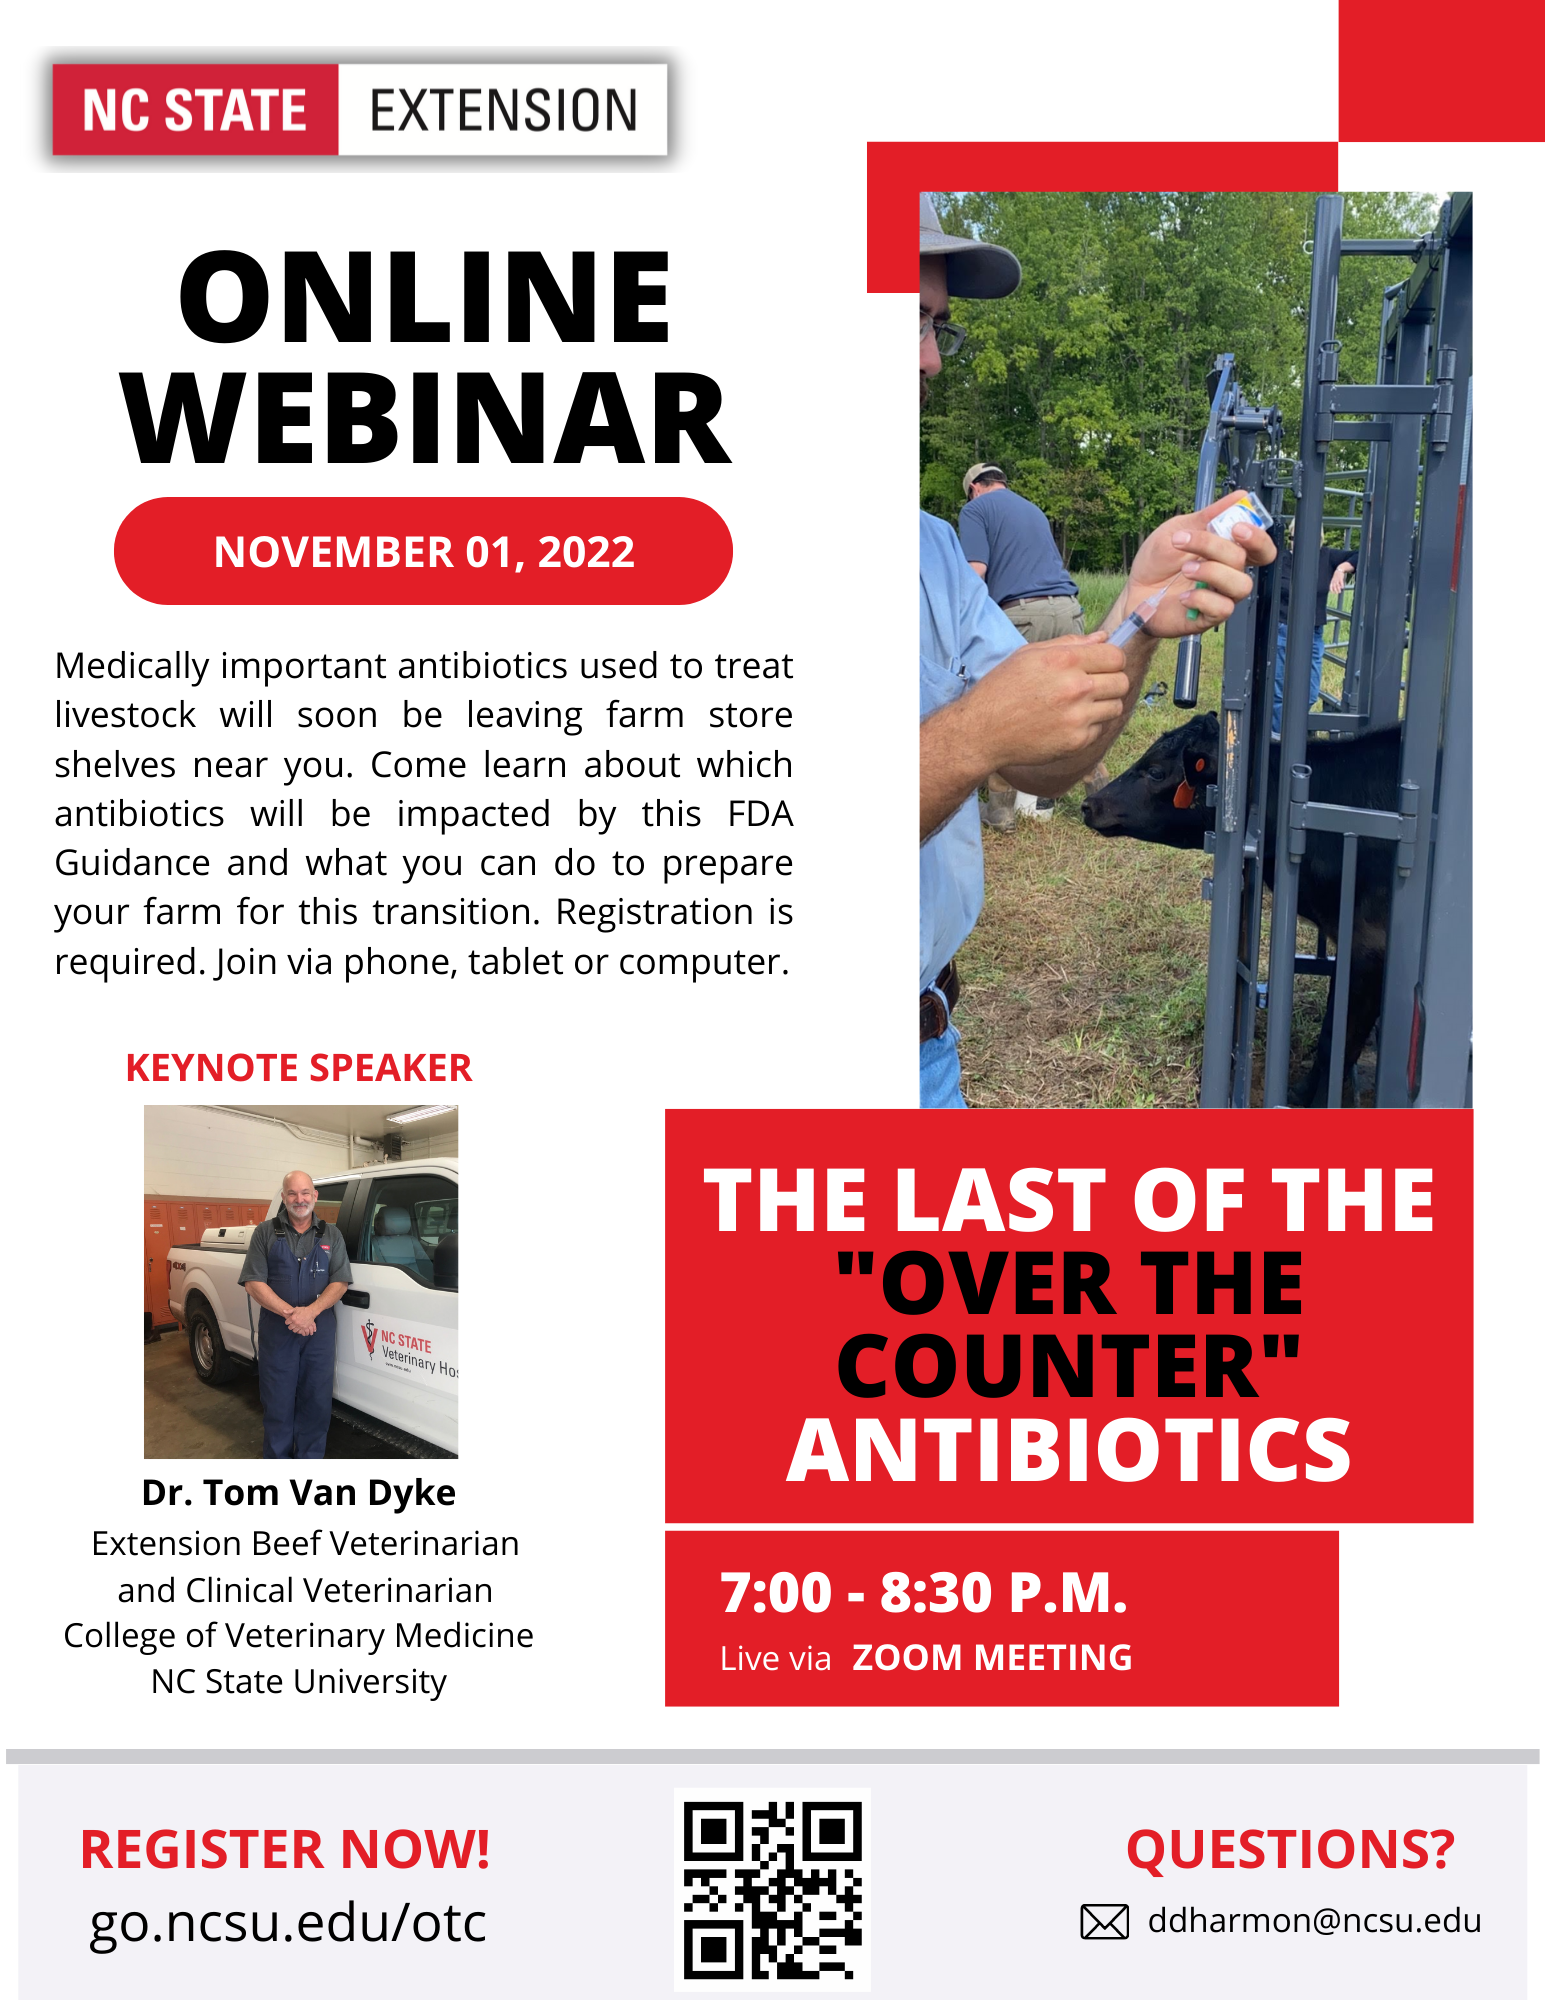 Online Webinar, November 01, 2022. The last of the "Over the Counter" Antibiotics. Medically important antibiotics used to treat livestock will soon be leaving farm store shelves near you. Come learn about which antibiotics will be impacted by this FDA guidance and what you can do to prepare your farm for this transition.